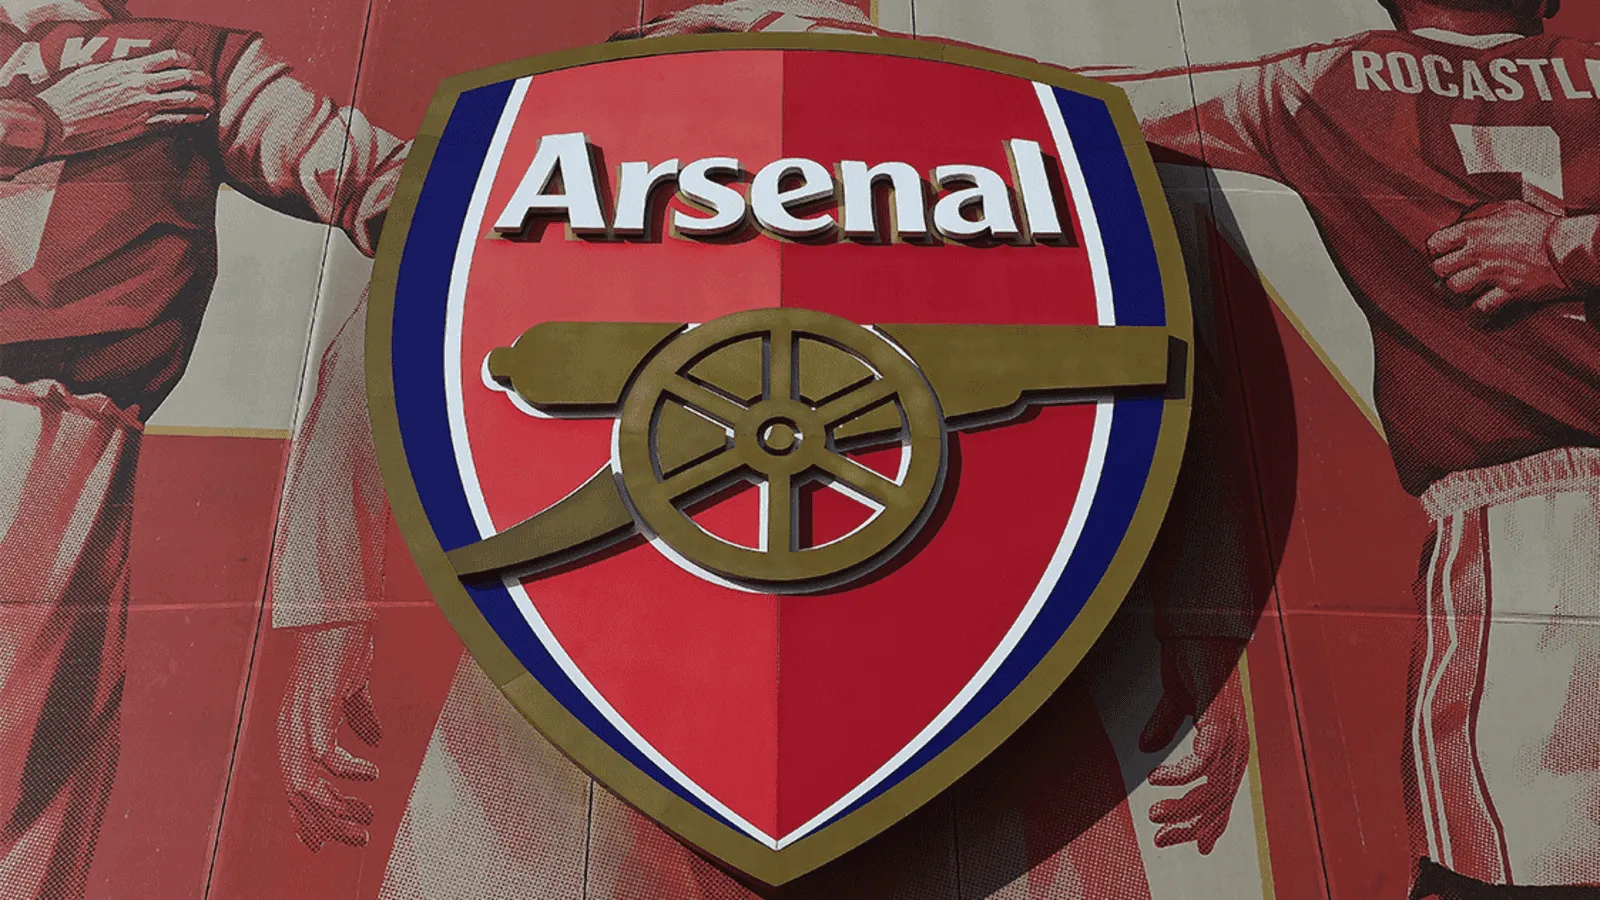 Arsenal will come to regret new summer signing -- Steve Nicol